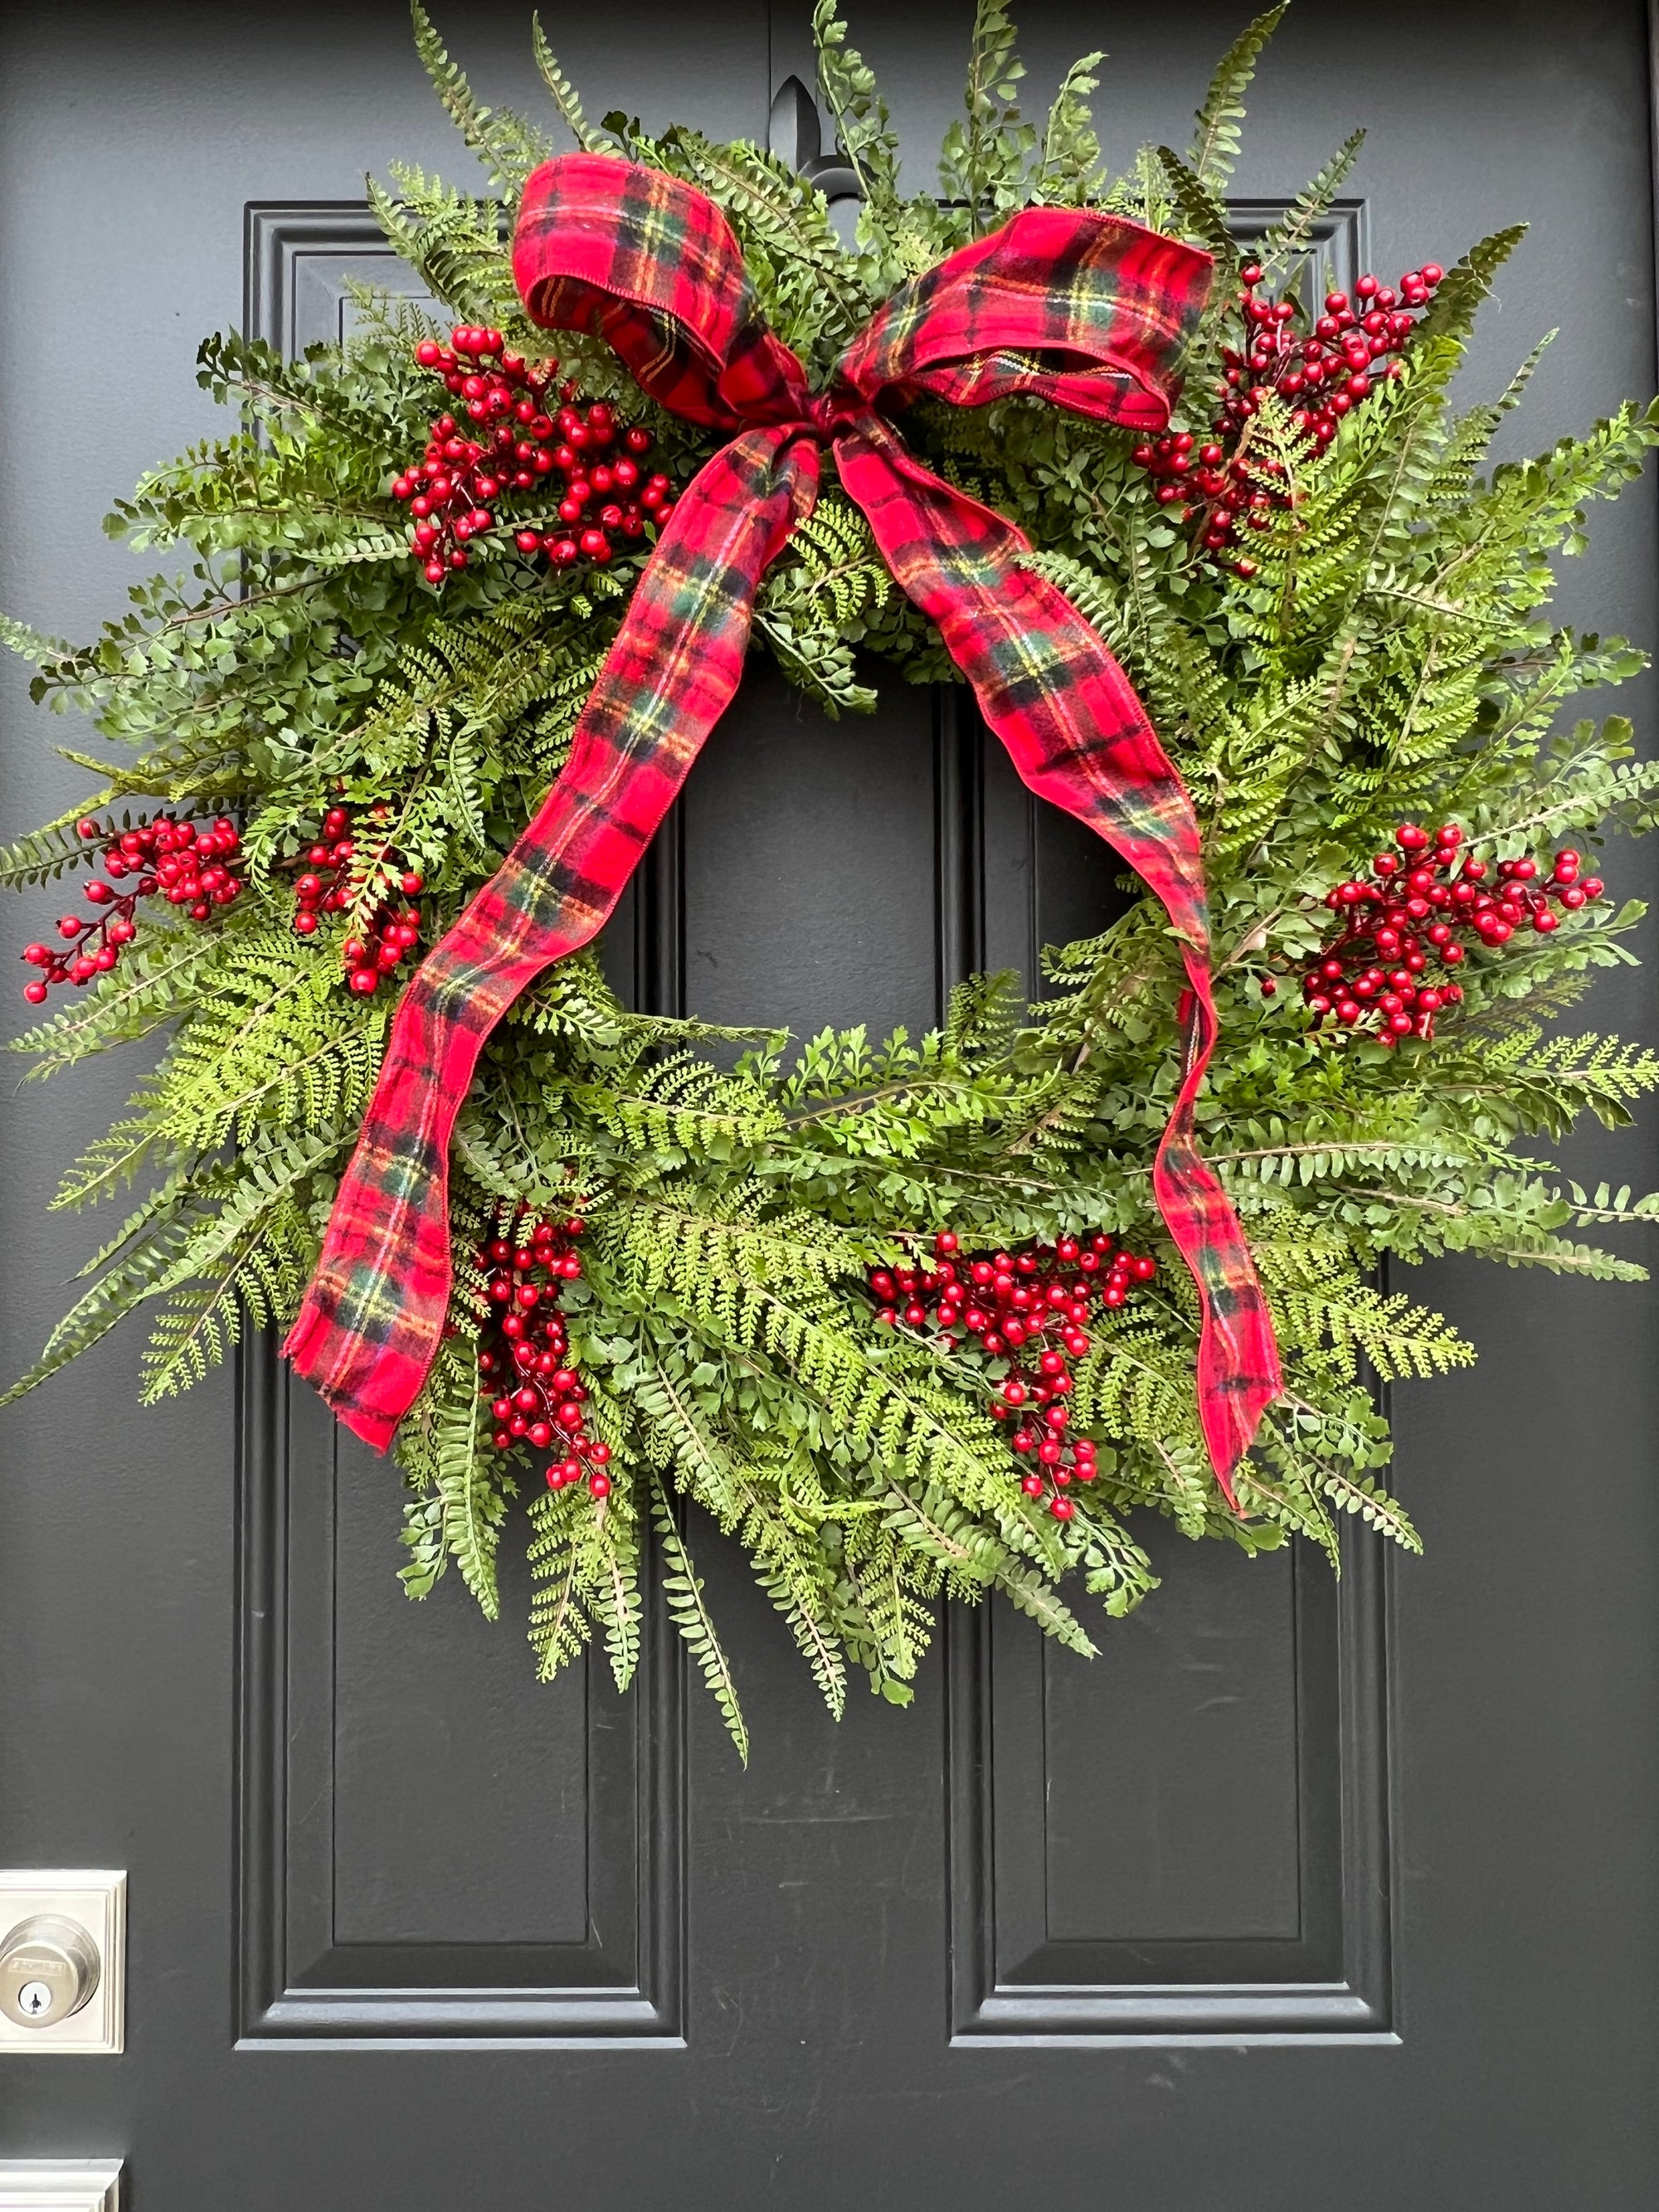 Christmas Fern Wreath with Red Berries and Plaid Bow